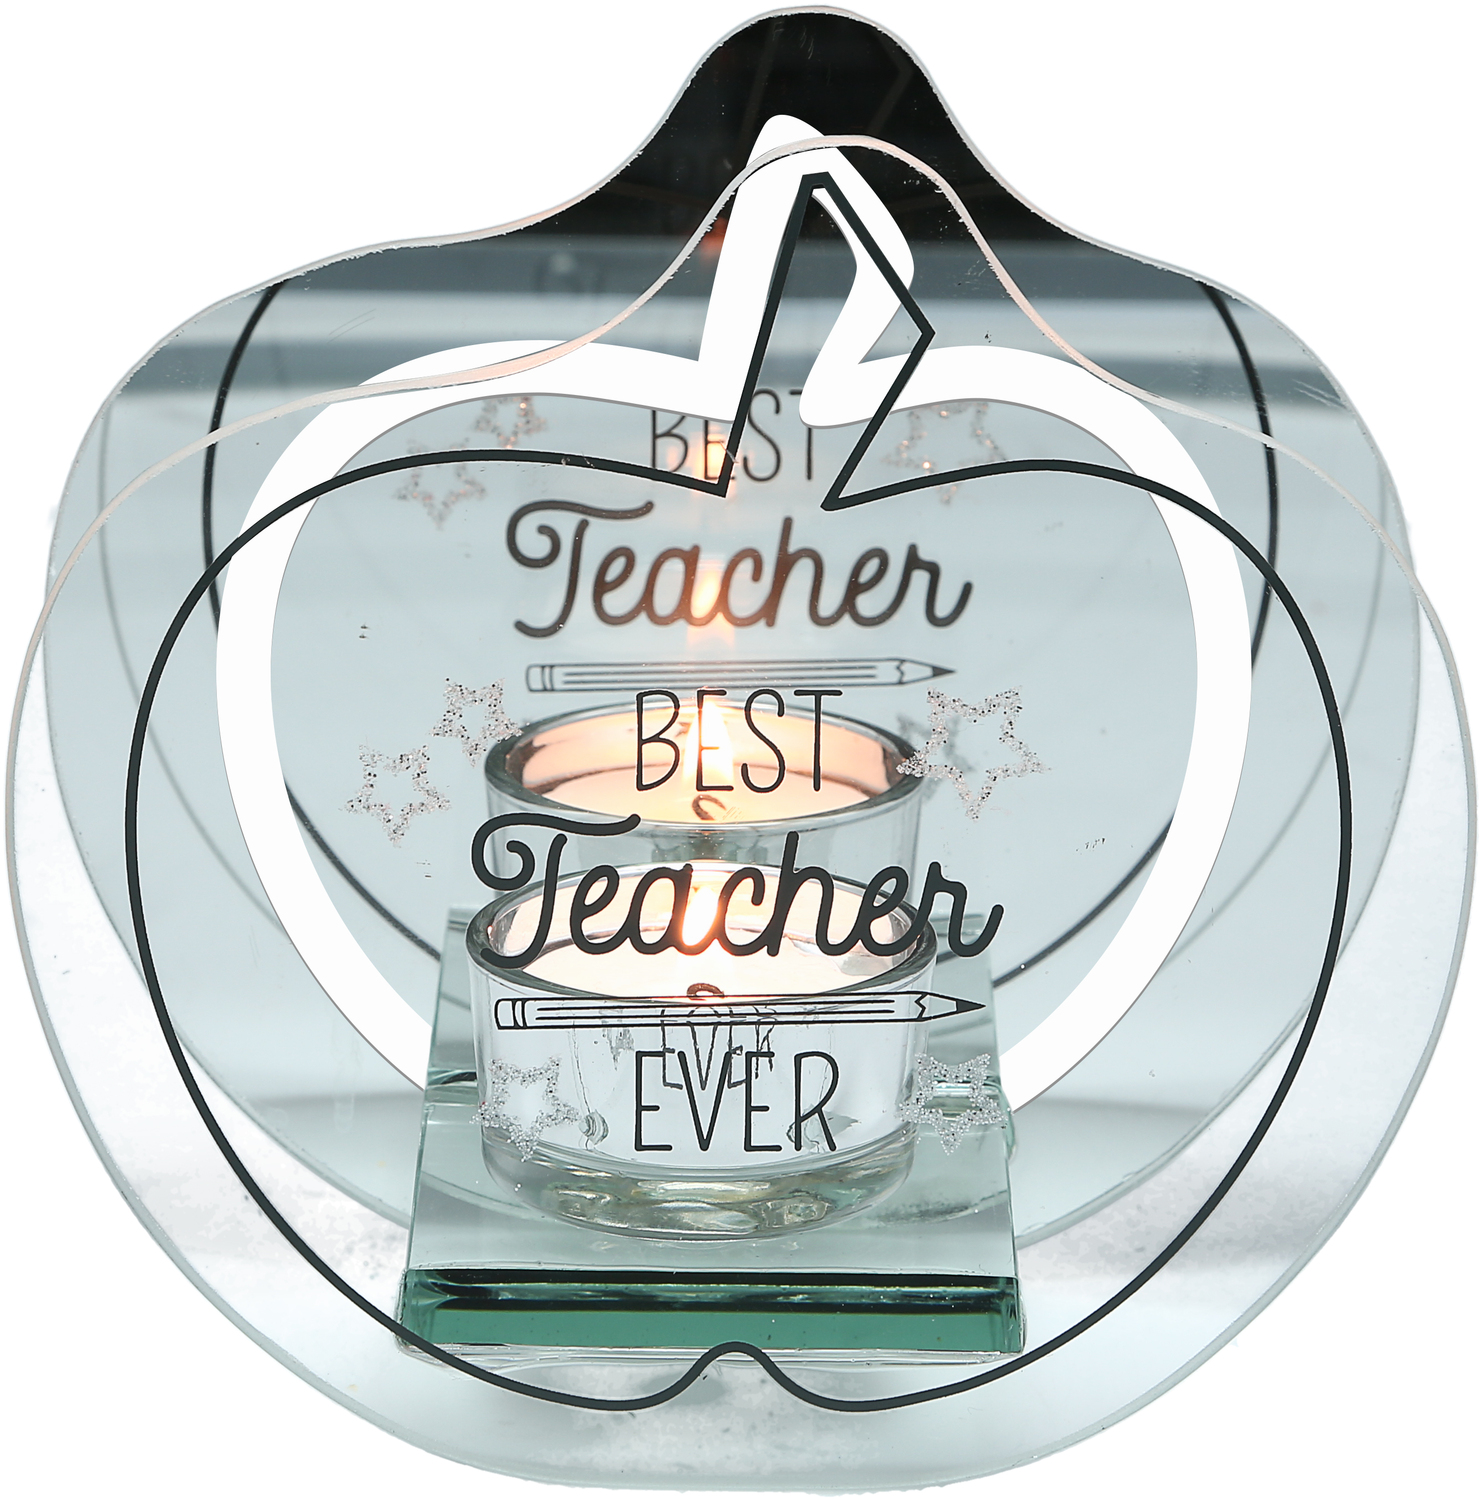 Best Teacher Ever by Teachable Moments - Best Teacher Ever - 5.5" x 5.25" Mirrored Glass Candle Holder